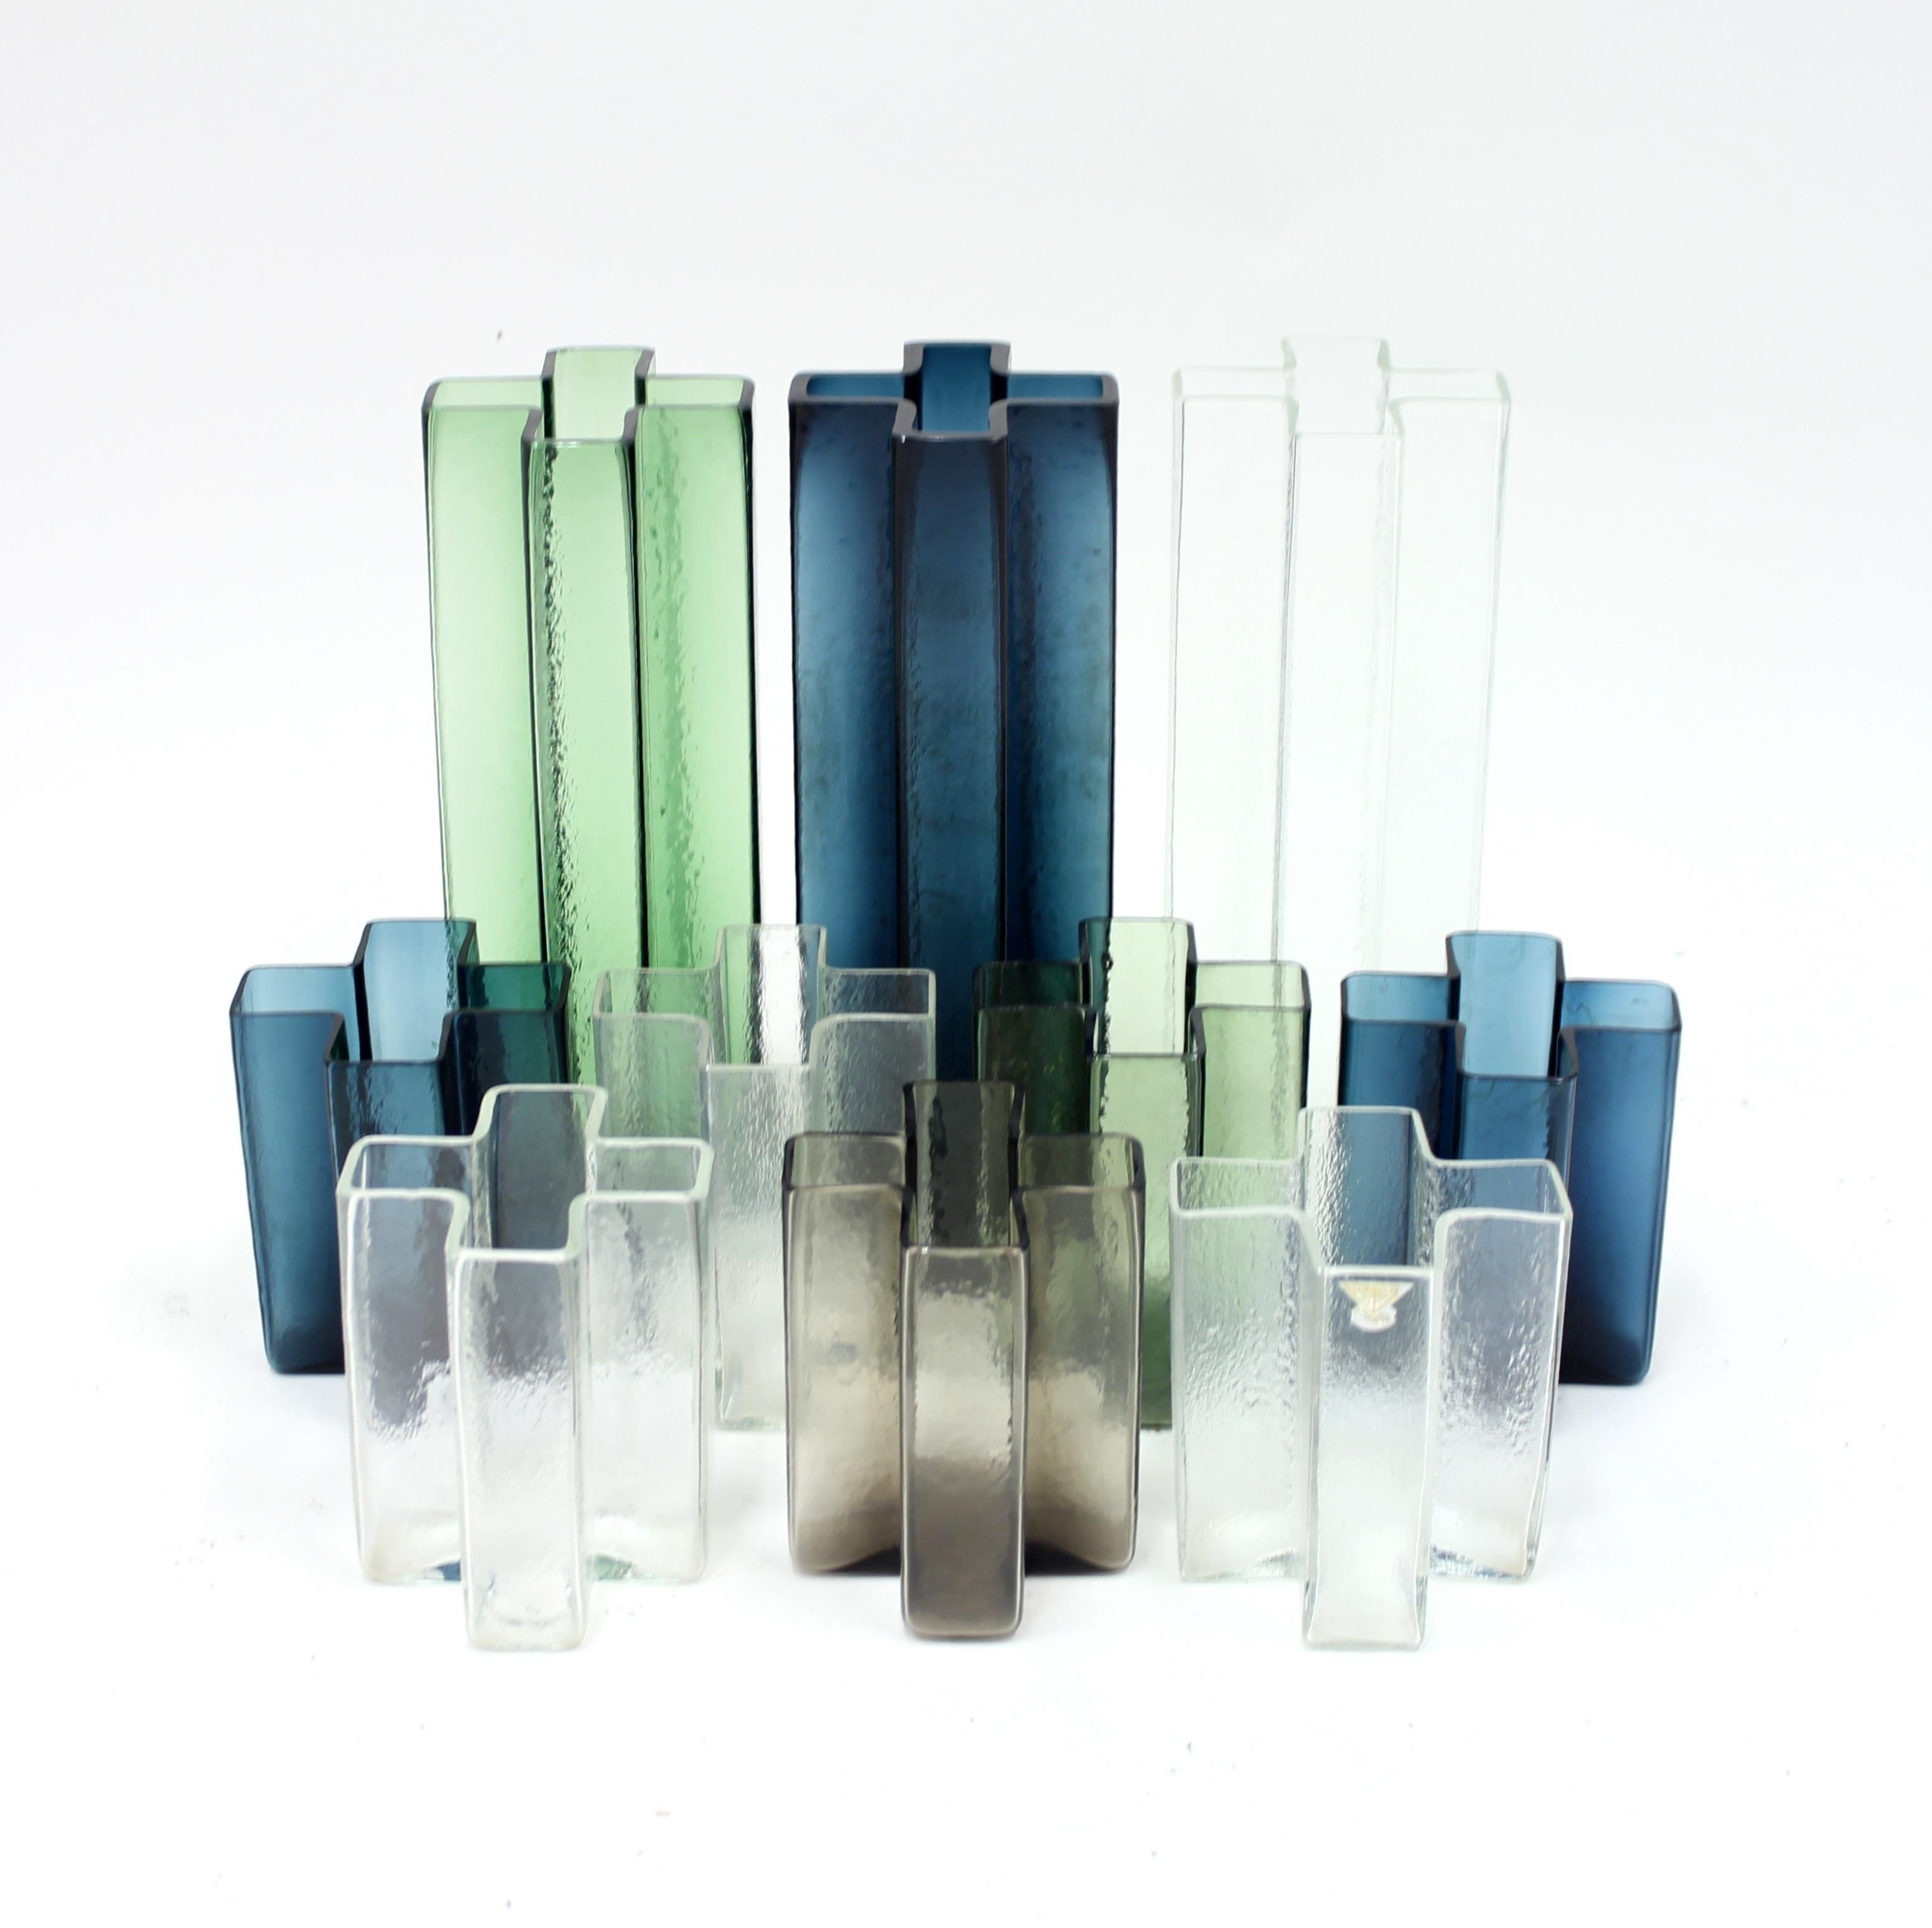 Rare large set of 10 Cross vases designed by Danish designer Bodil Kjaer for Swedish manufacturer Gullaskruf in the 1960s. The set contains of two sizes, the largest measuring 27 cm in height and the smallest 12 cm. One of the small vases has the